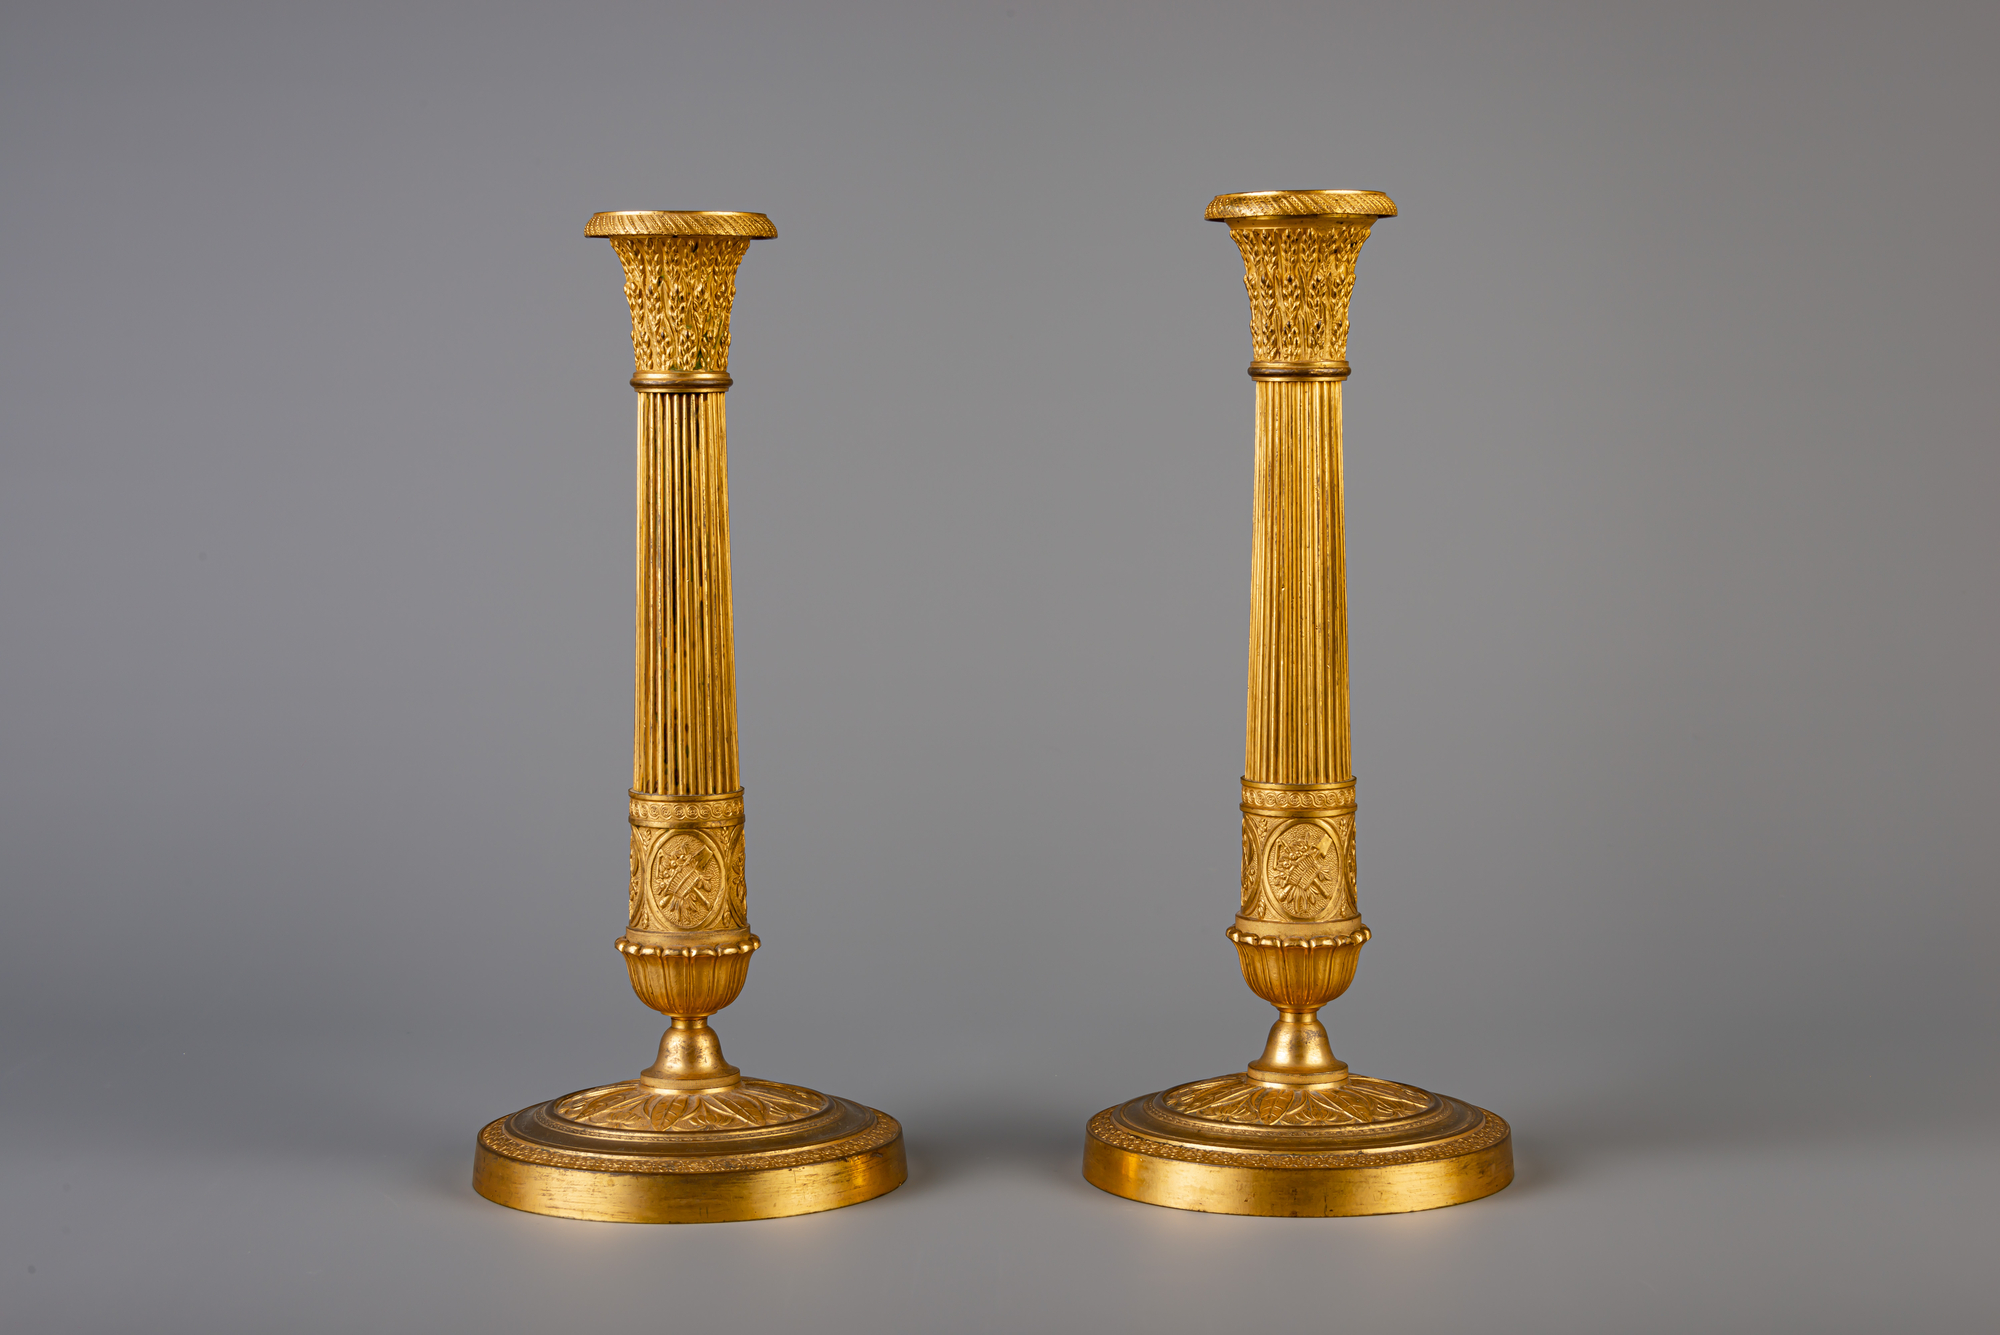 A pair of French Neoclassical gilt bronze candlesticks, 19th C.